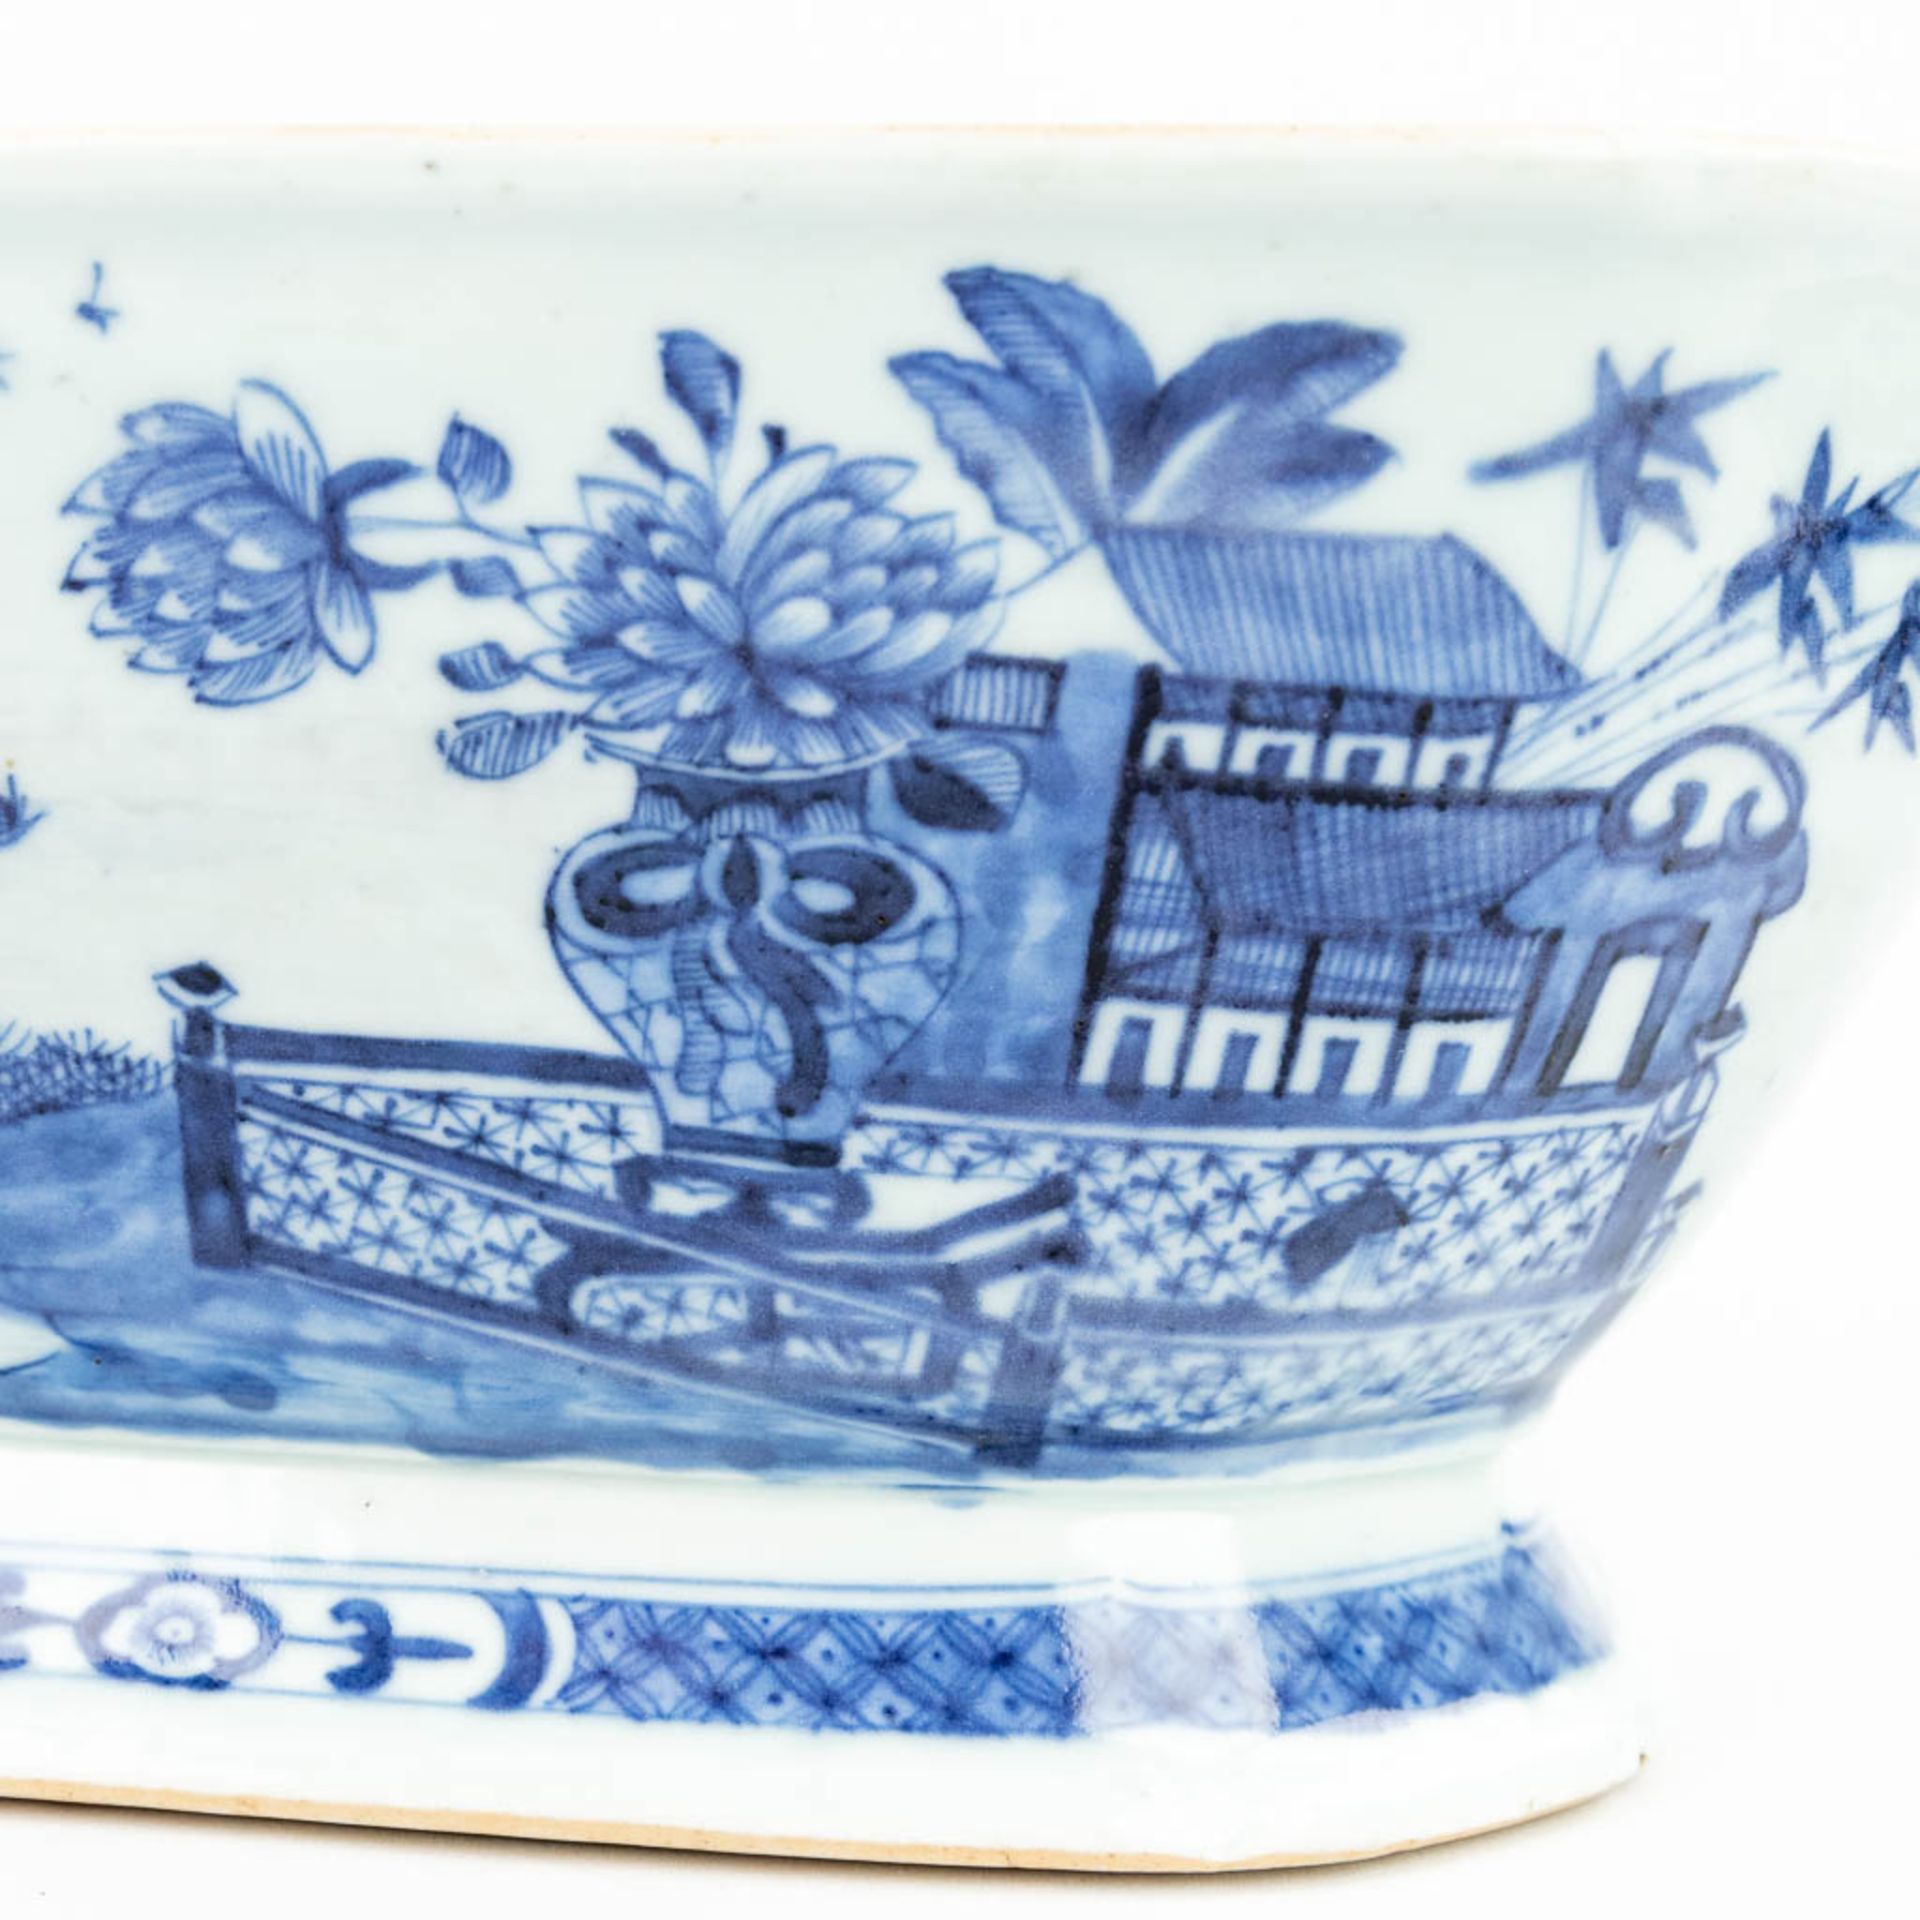 A Chinese soup tureen made of blue-white porcelain. (22 x 31 x 22 cm) - Image 6 of 15